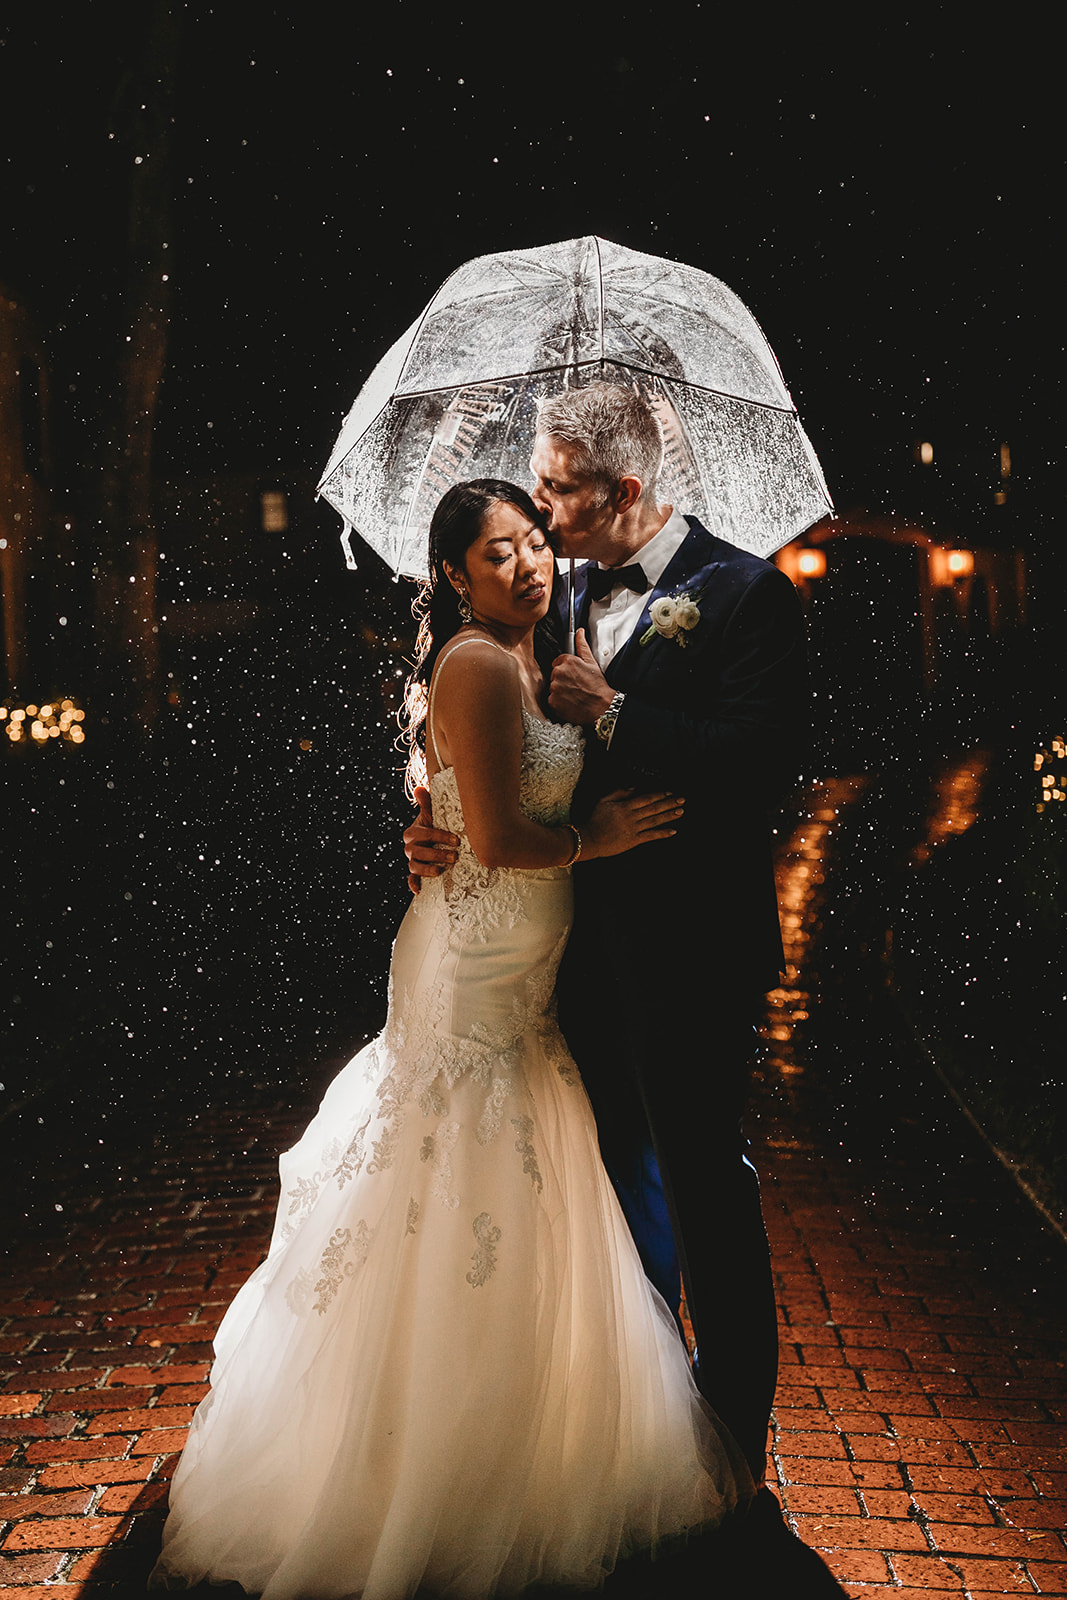 Image: Rainy Day Wedding at Epping Forest Yacht Club